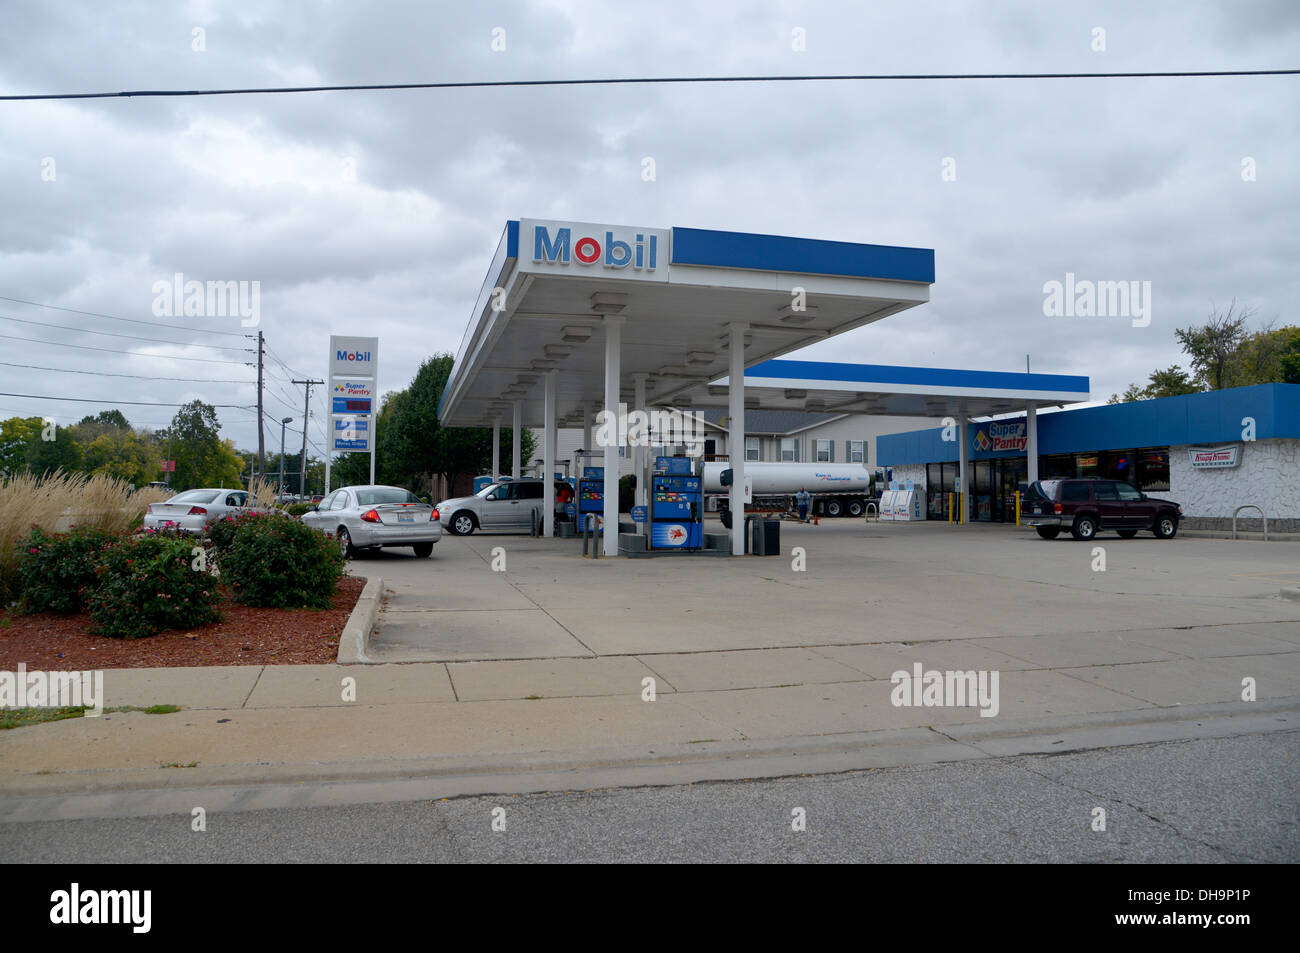 Mobil gas station forecourt in a small American town, Illinois USA Stock Photo